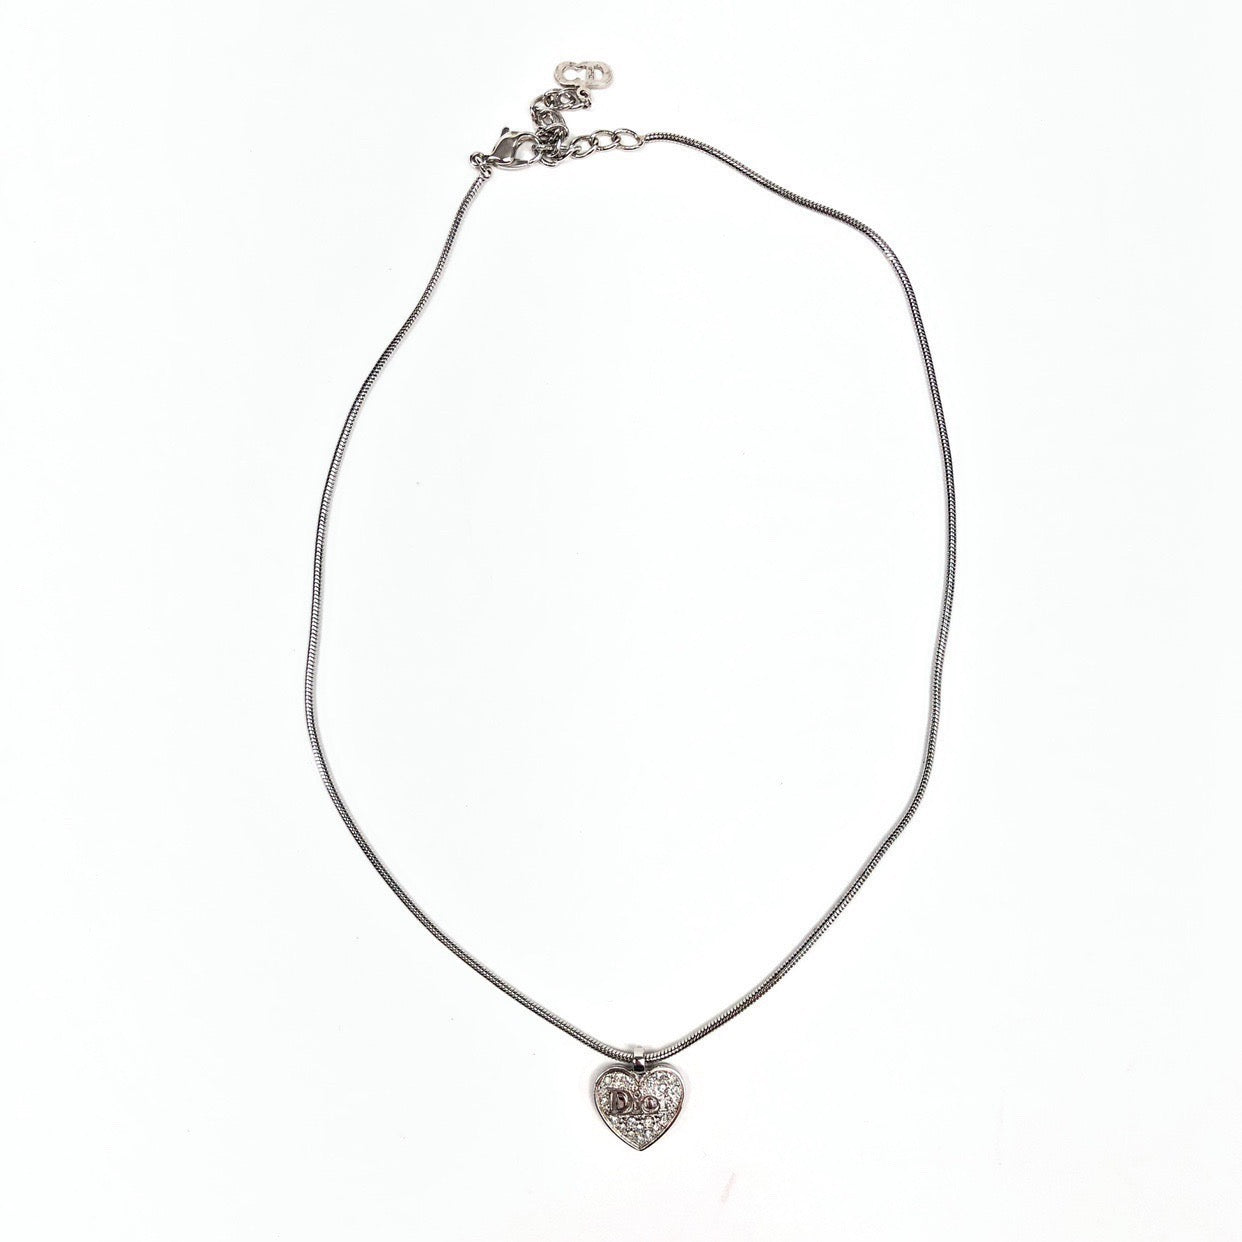 Christian Dior Jewelled Heart Necklace